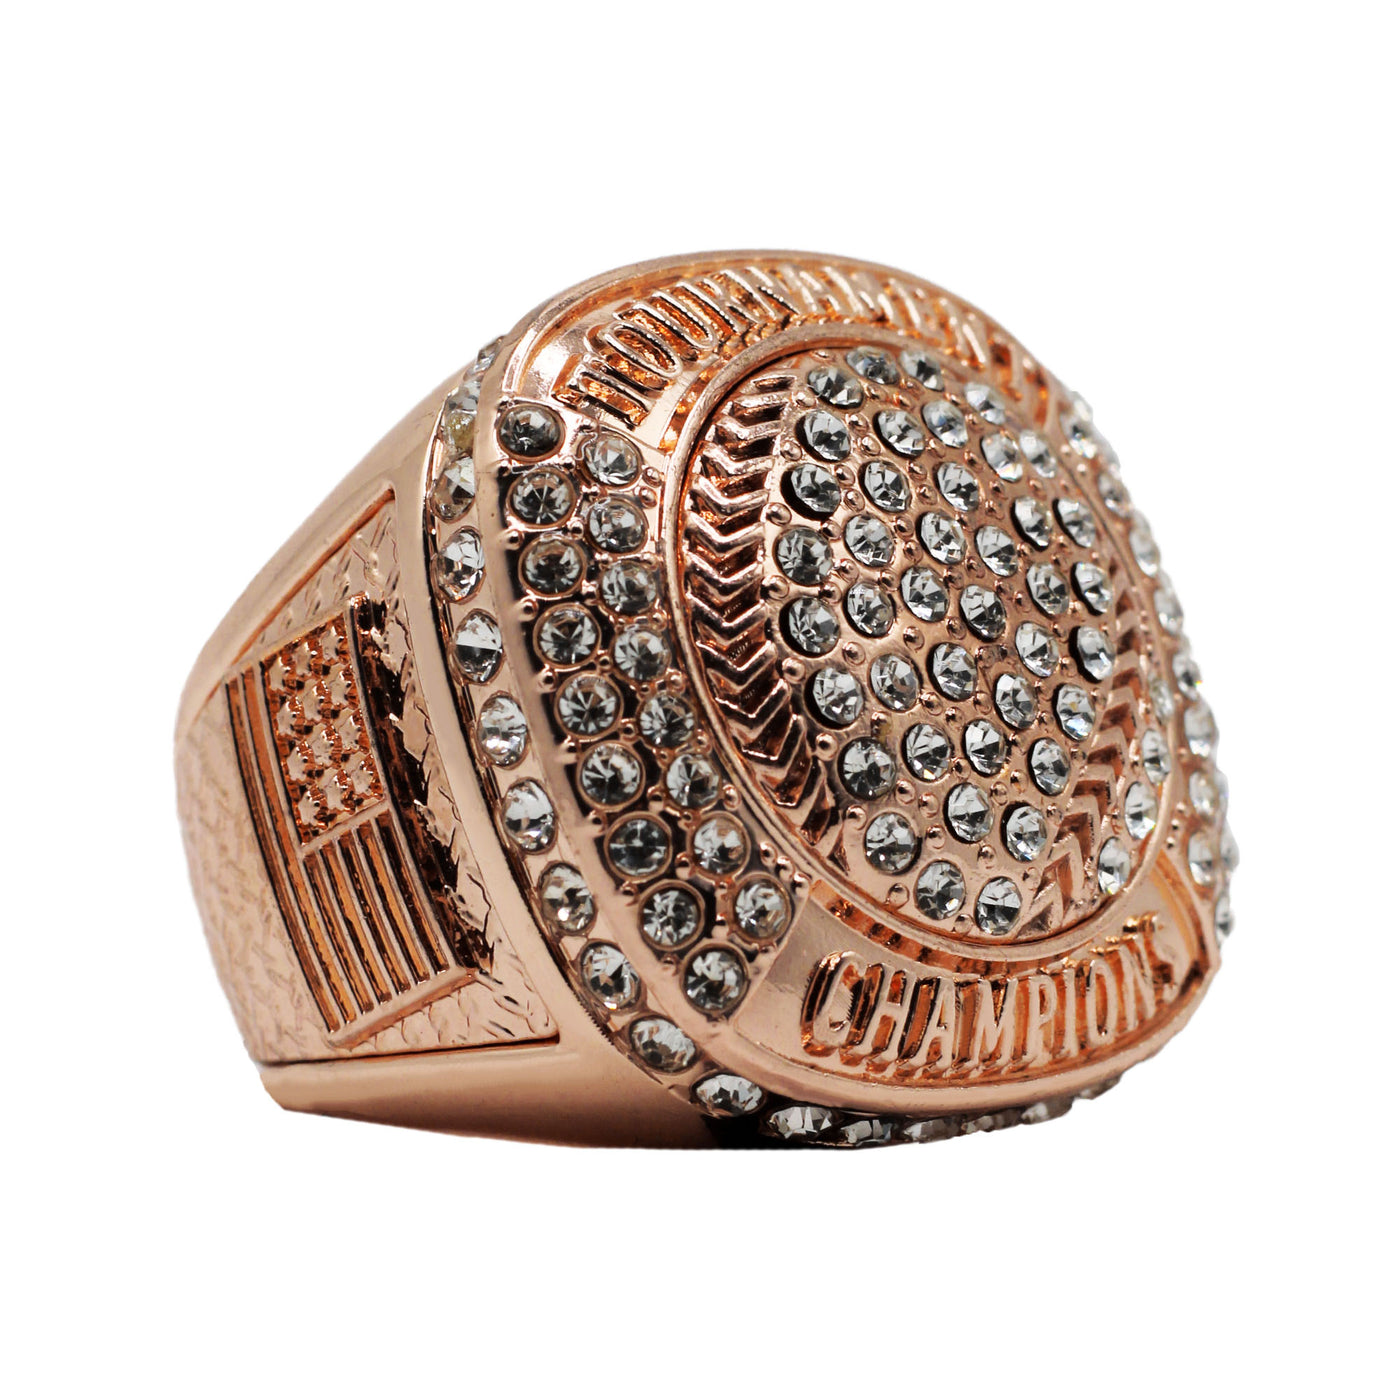 GEN5 CLASSIC ROSE GOLD TOURNAMENT CHAMPIONS Ring